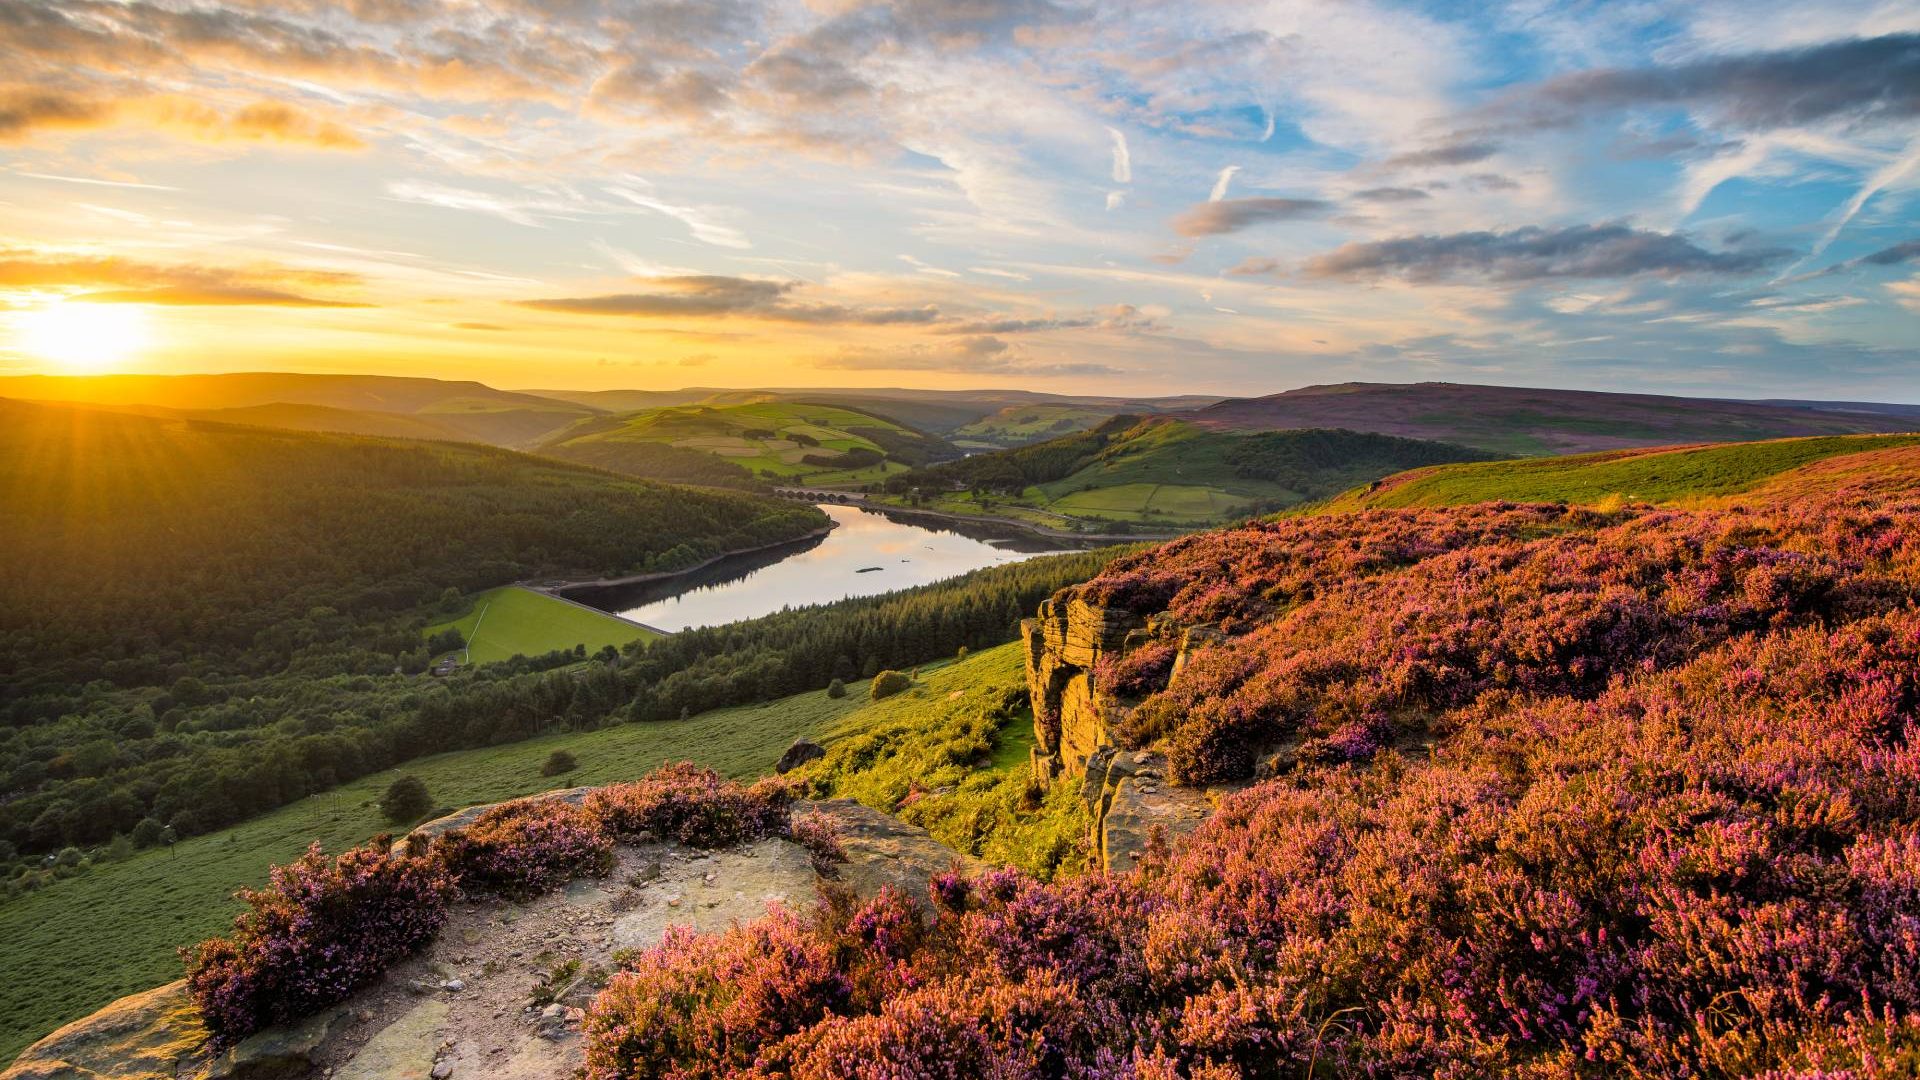 Sunset over the hills and lake in the Peak District